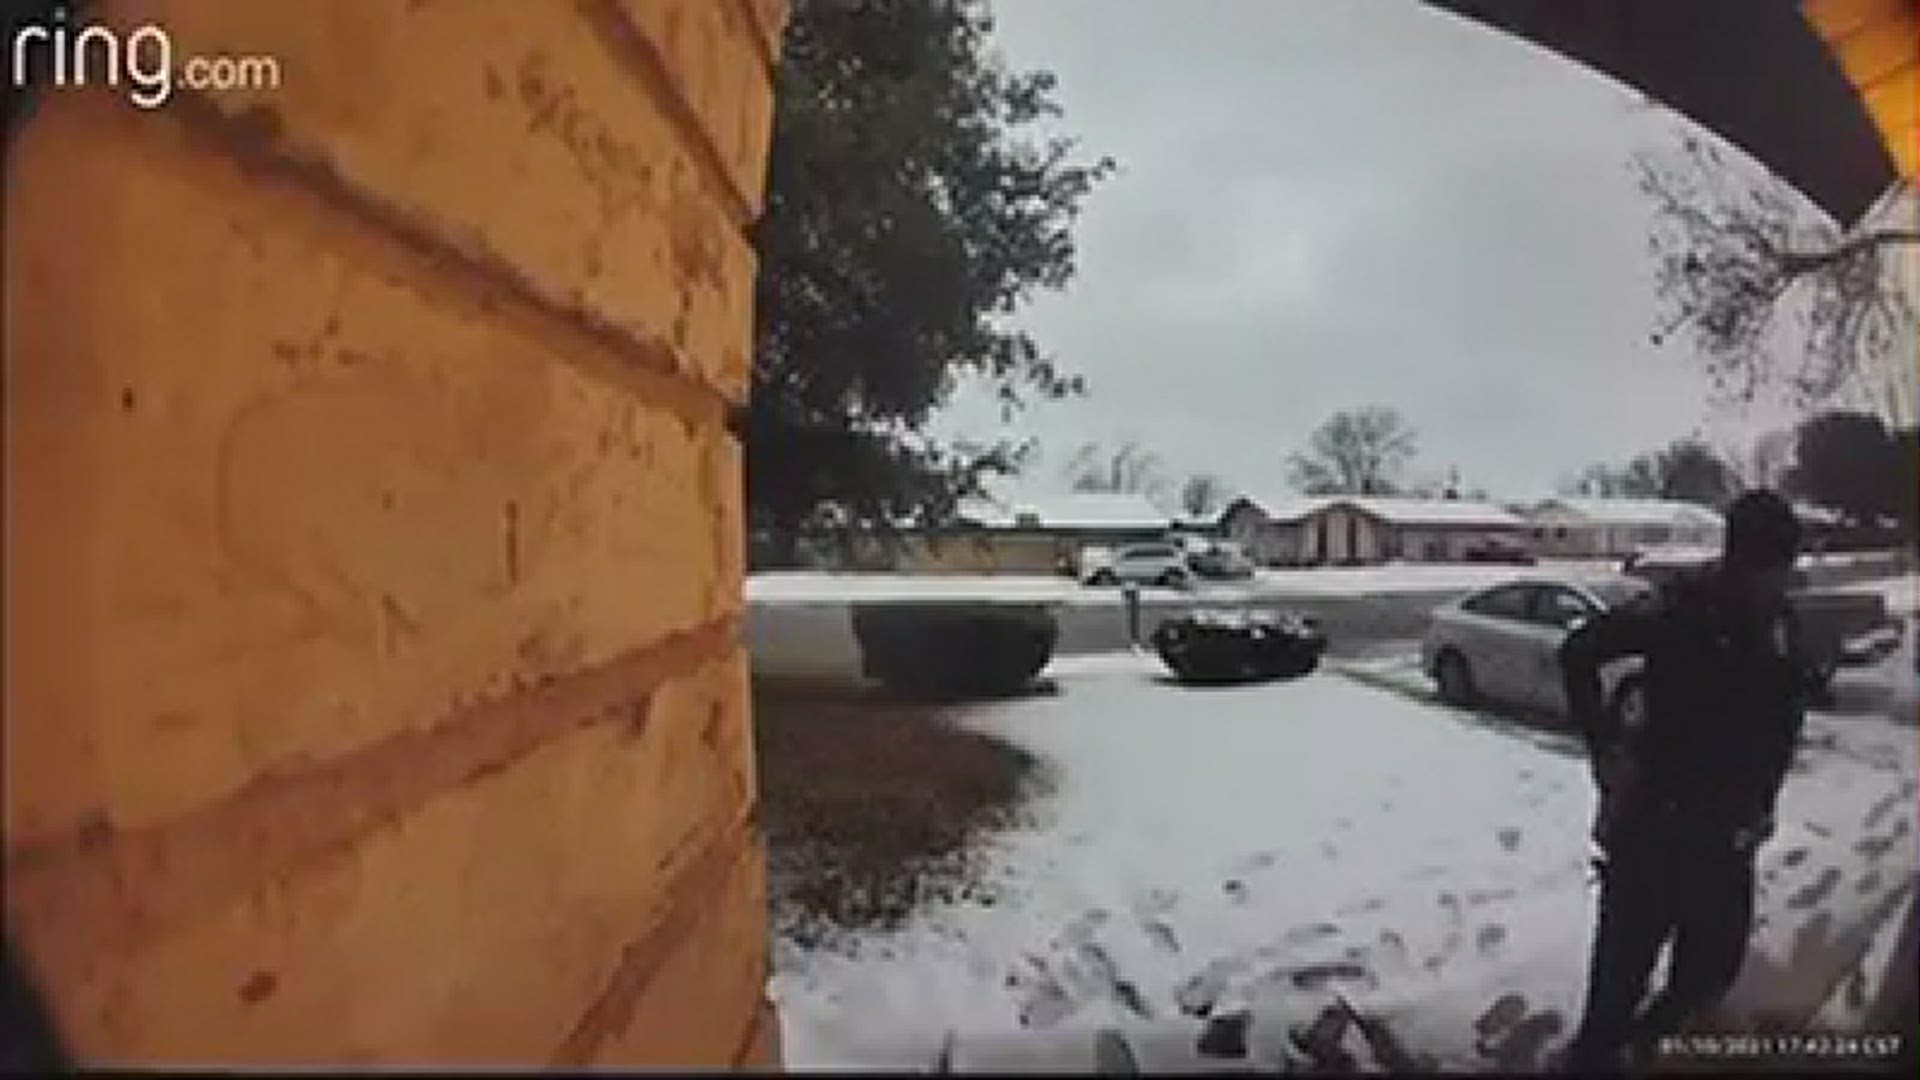 Doorbell and cell phone video caught the moments leading up to an unarmed man getting shot by a Killen police officer as he responded to a psychiatric call.